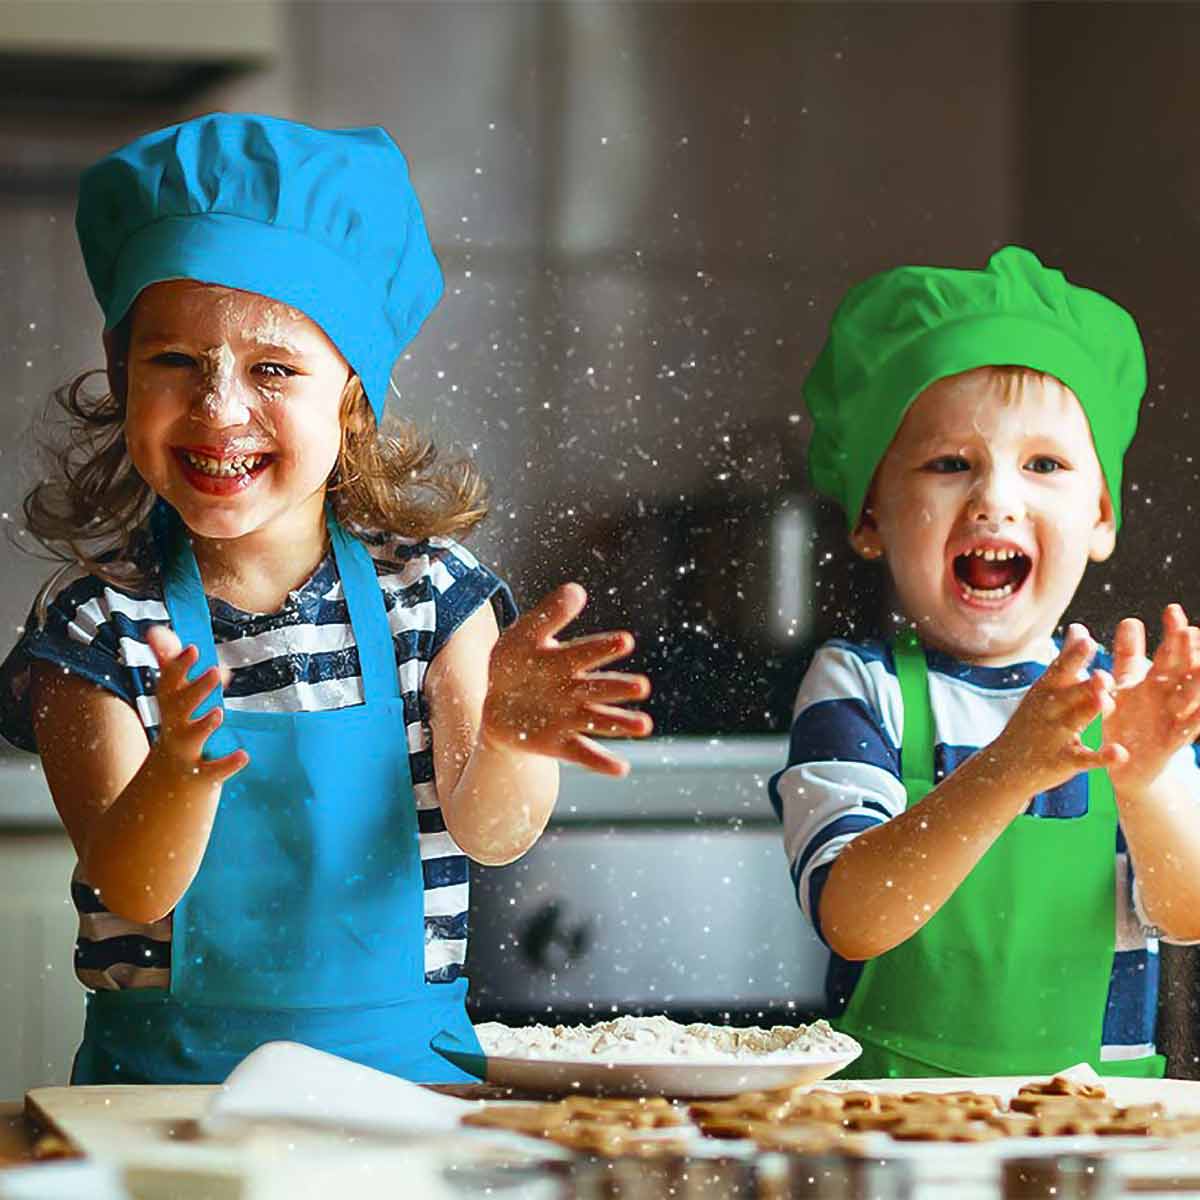 Kids Apron and Chef’s Hat Set with smiling kids baking cookies.